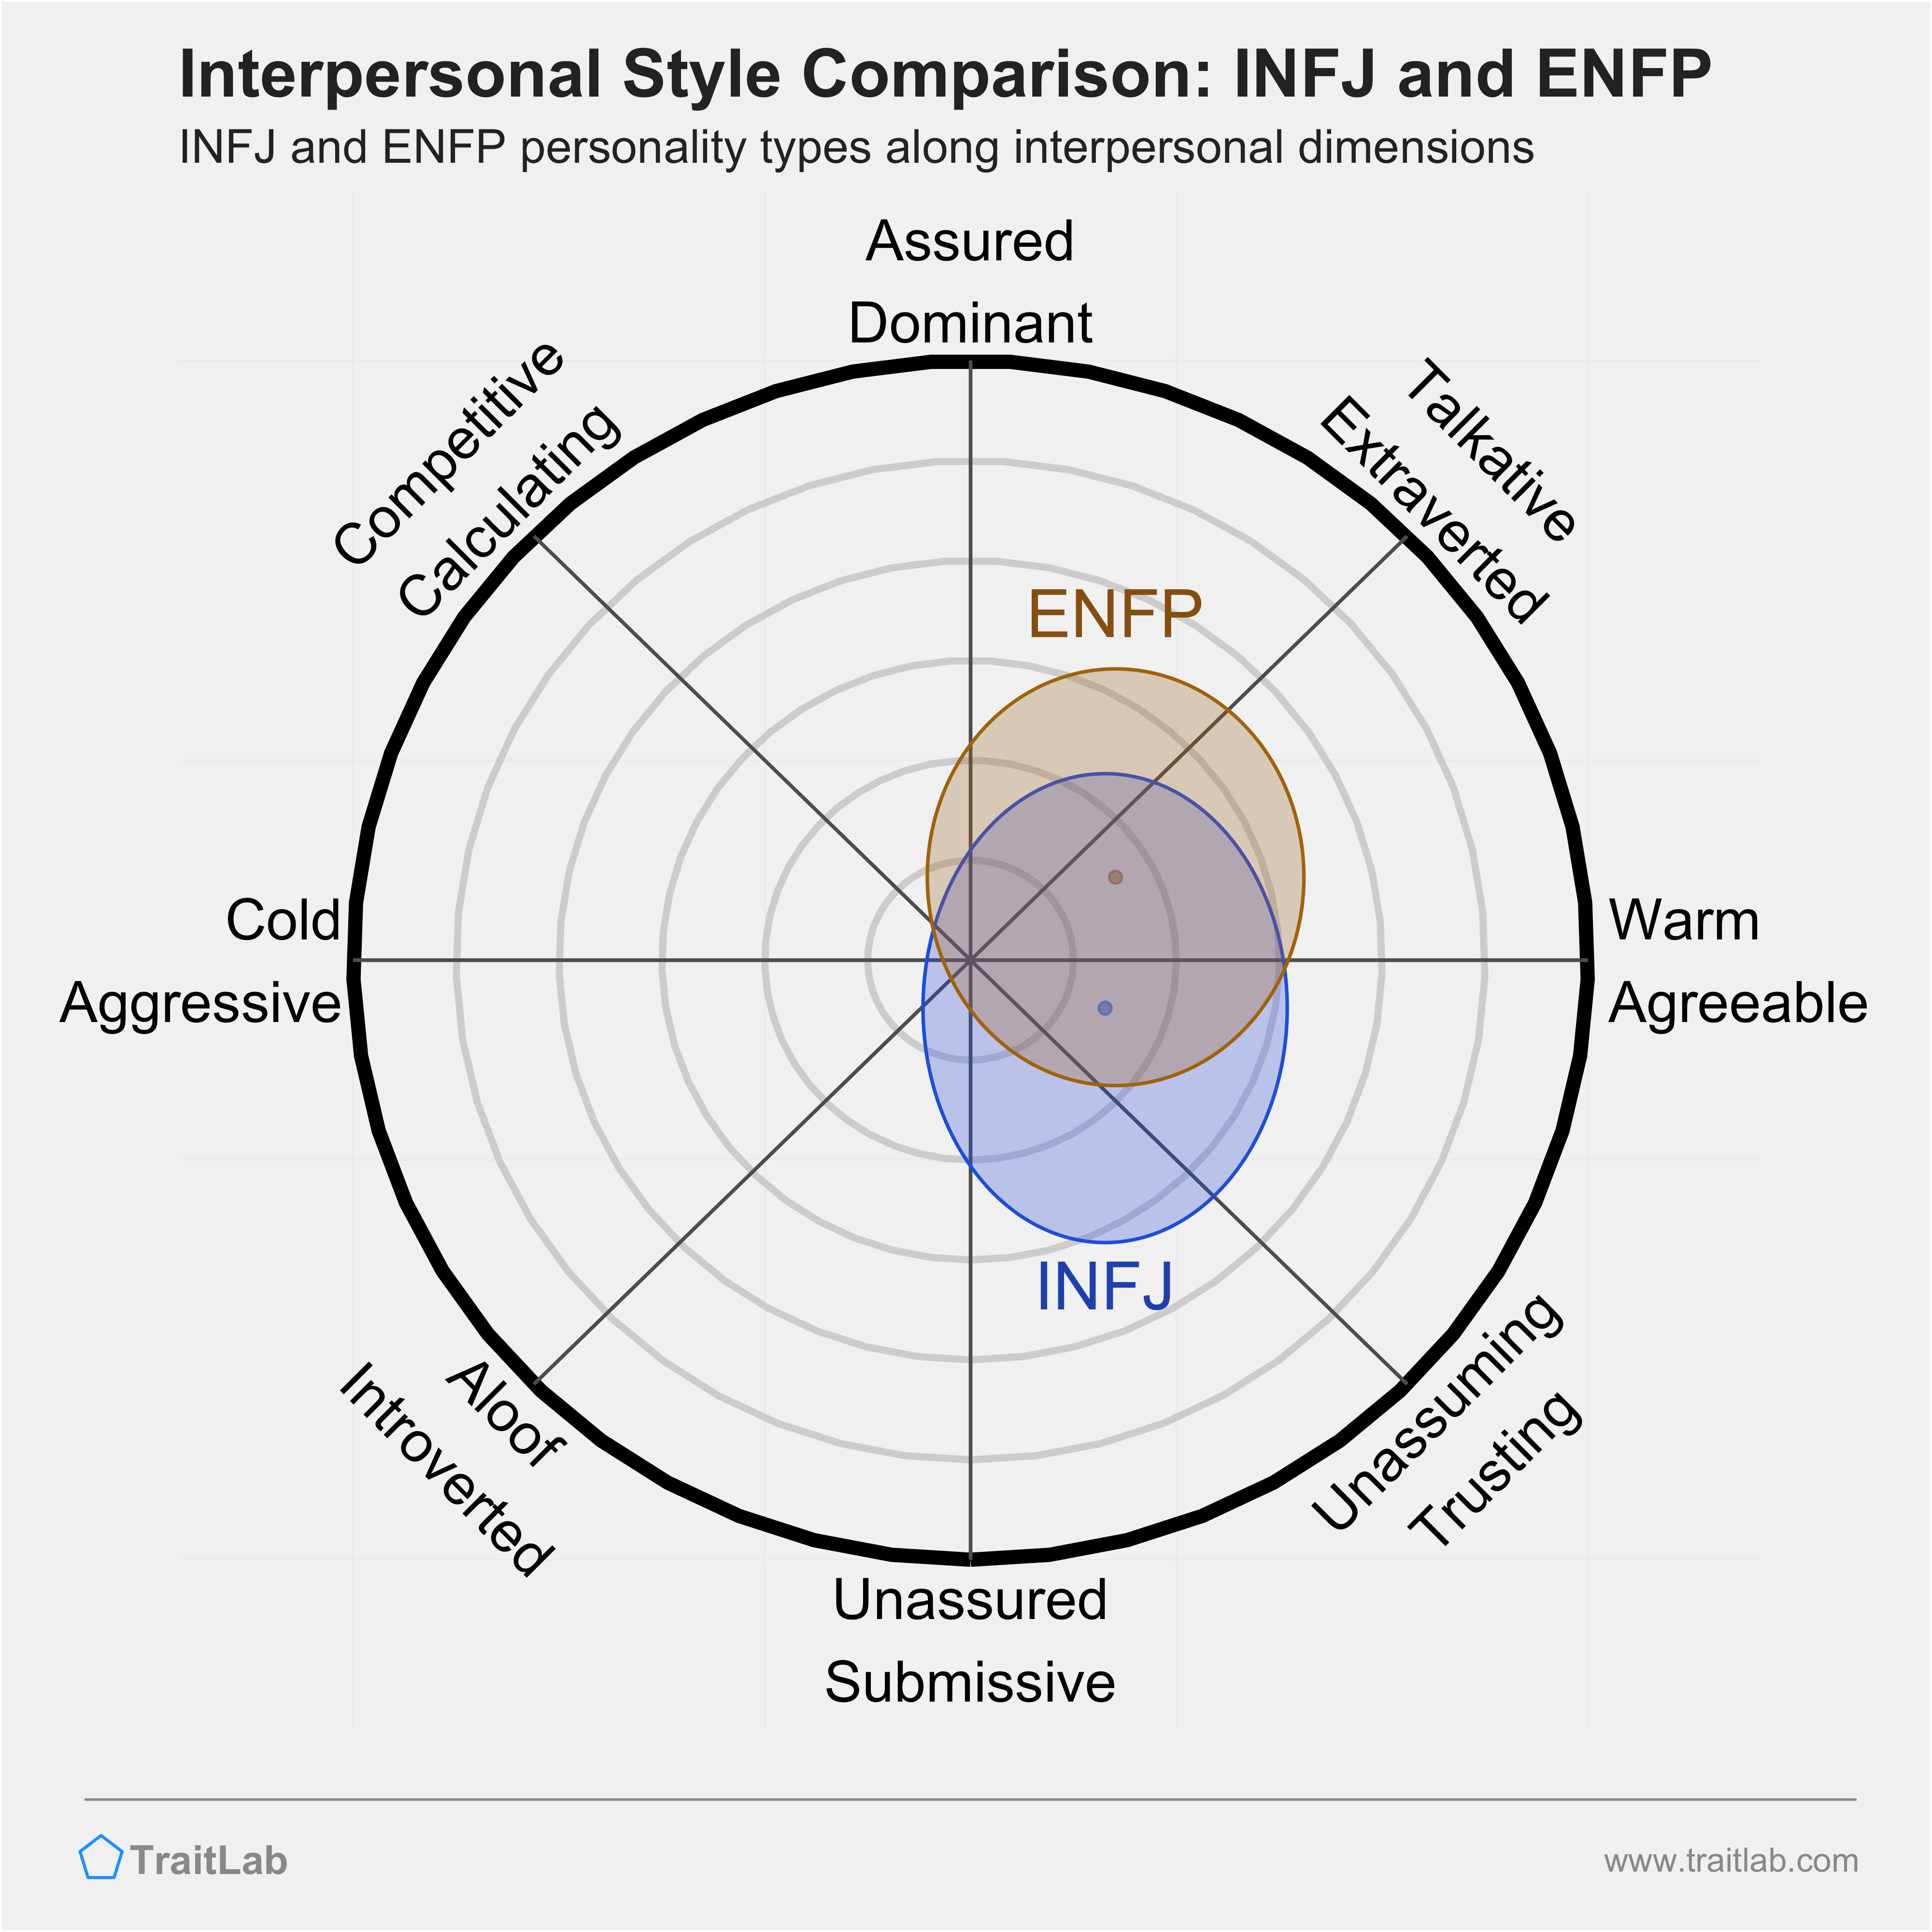 INFJ and ENFP comparison across interpersonal dimensions